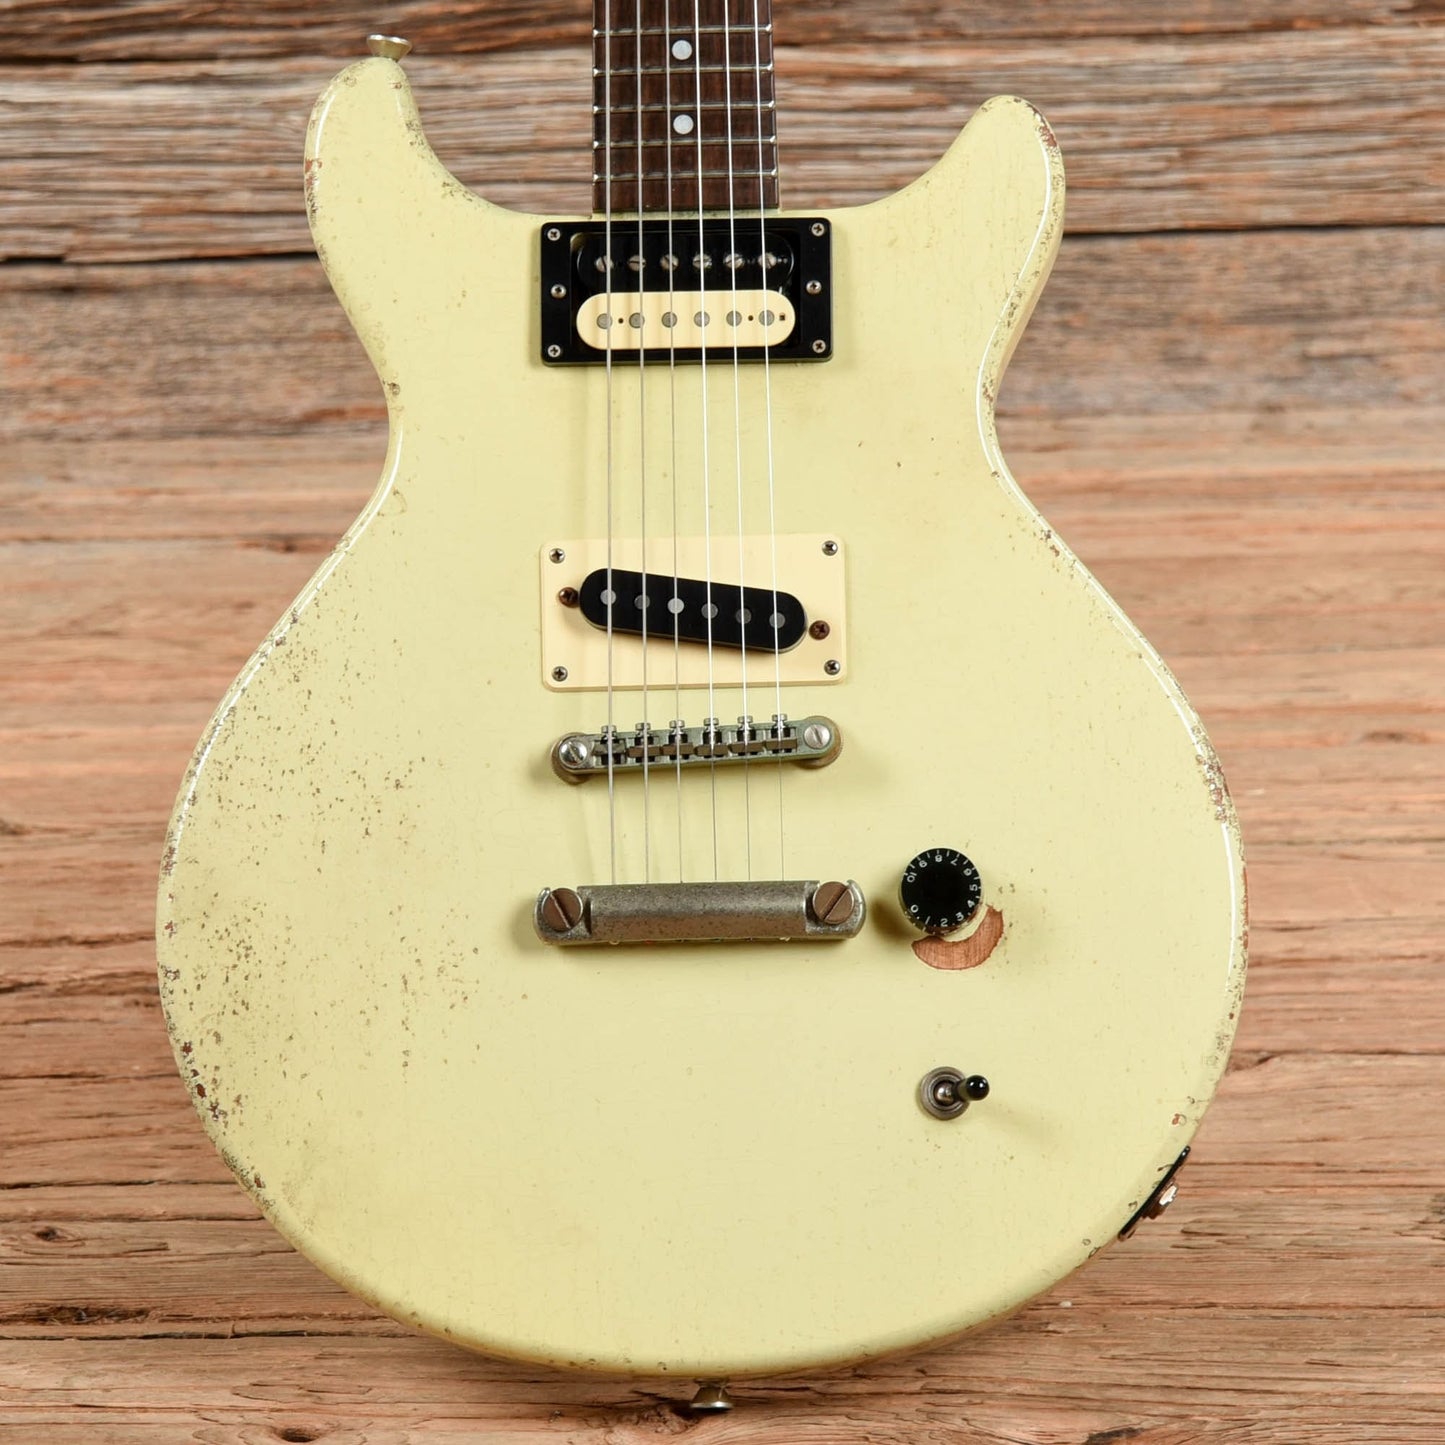 Rock N Roll Relics Thunders DC Aged White 2018 Electric Guitars / Solid Body